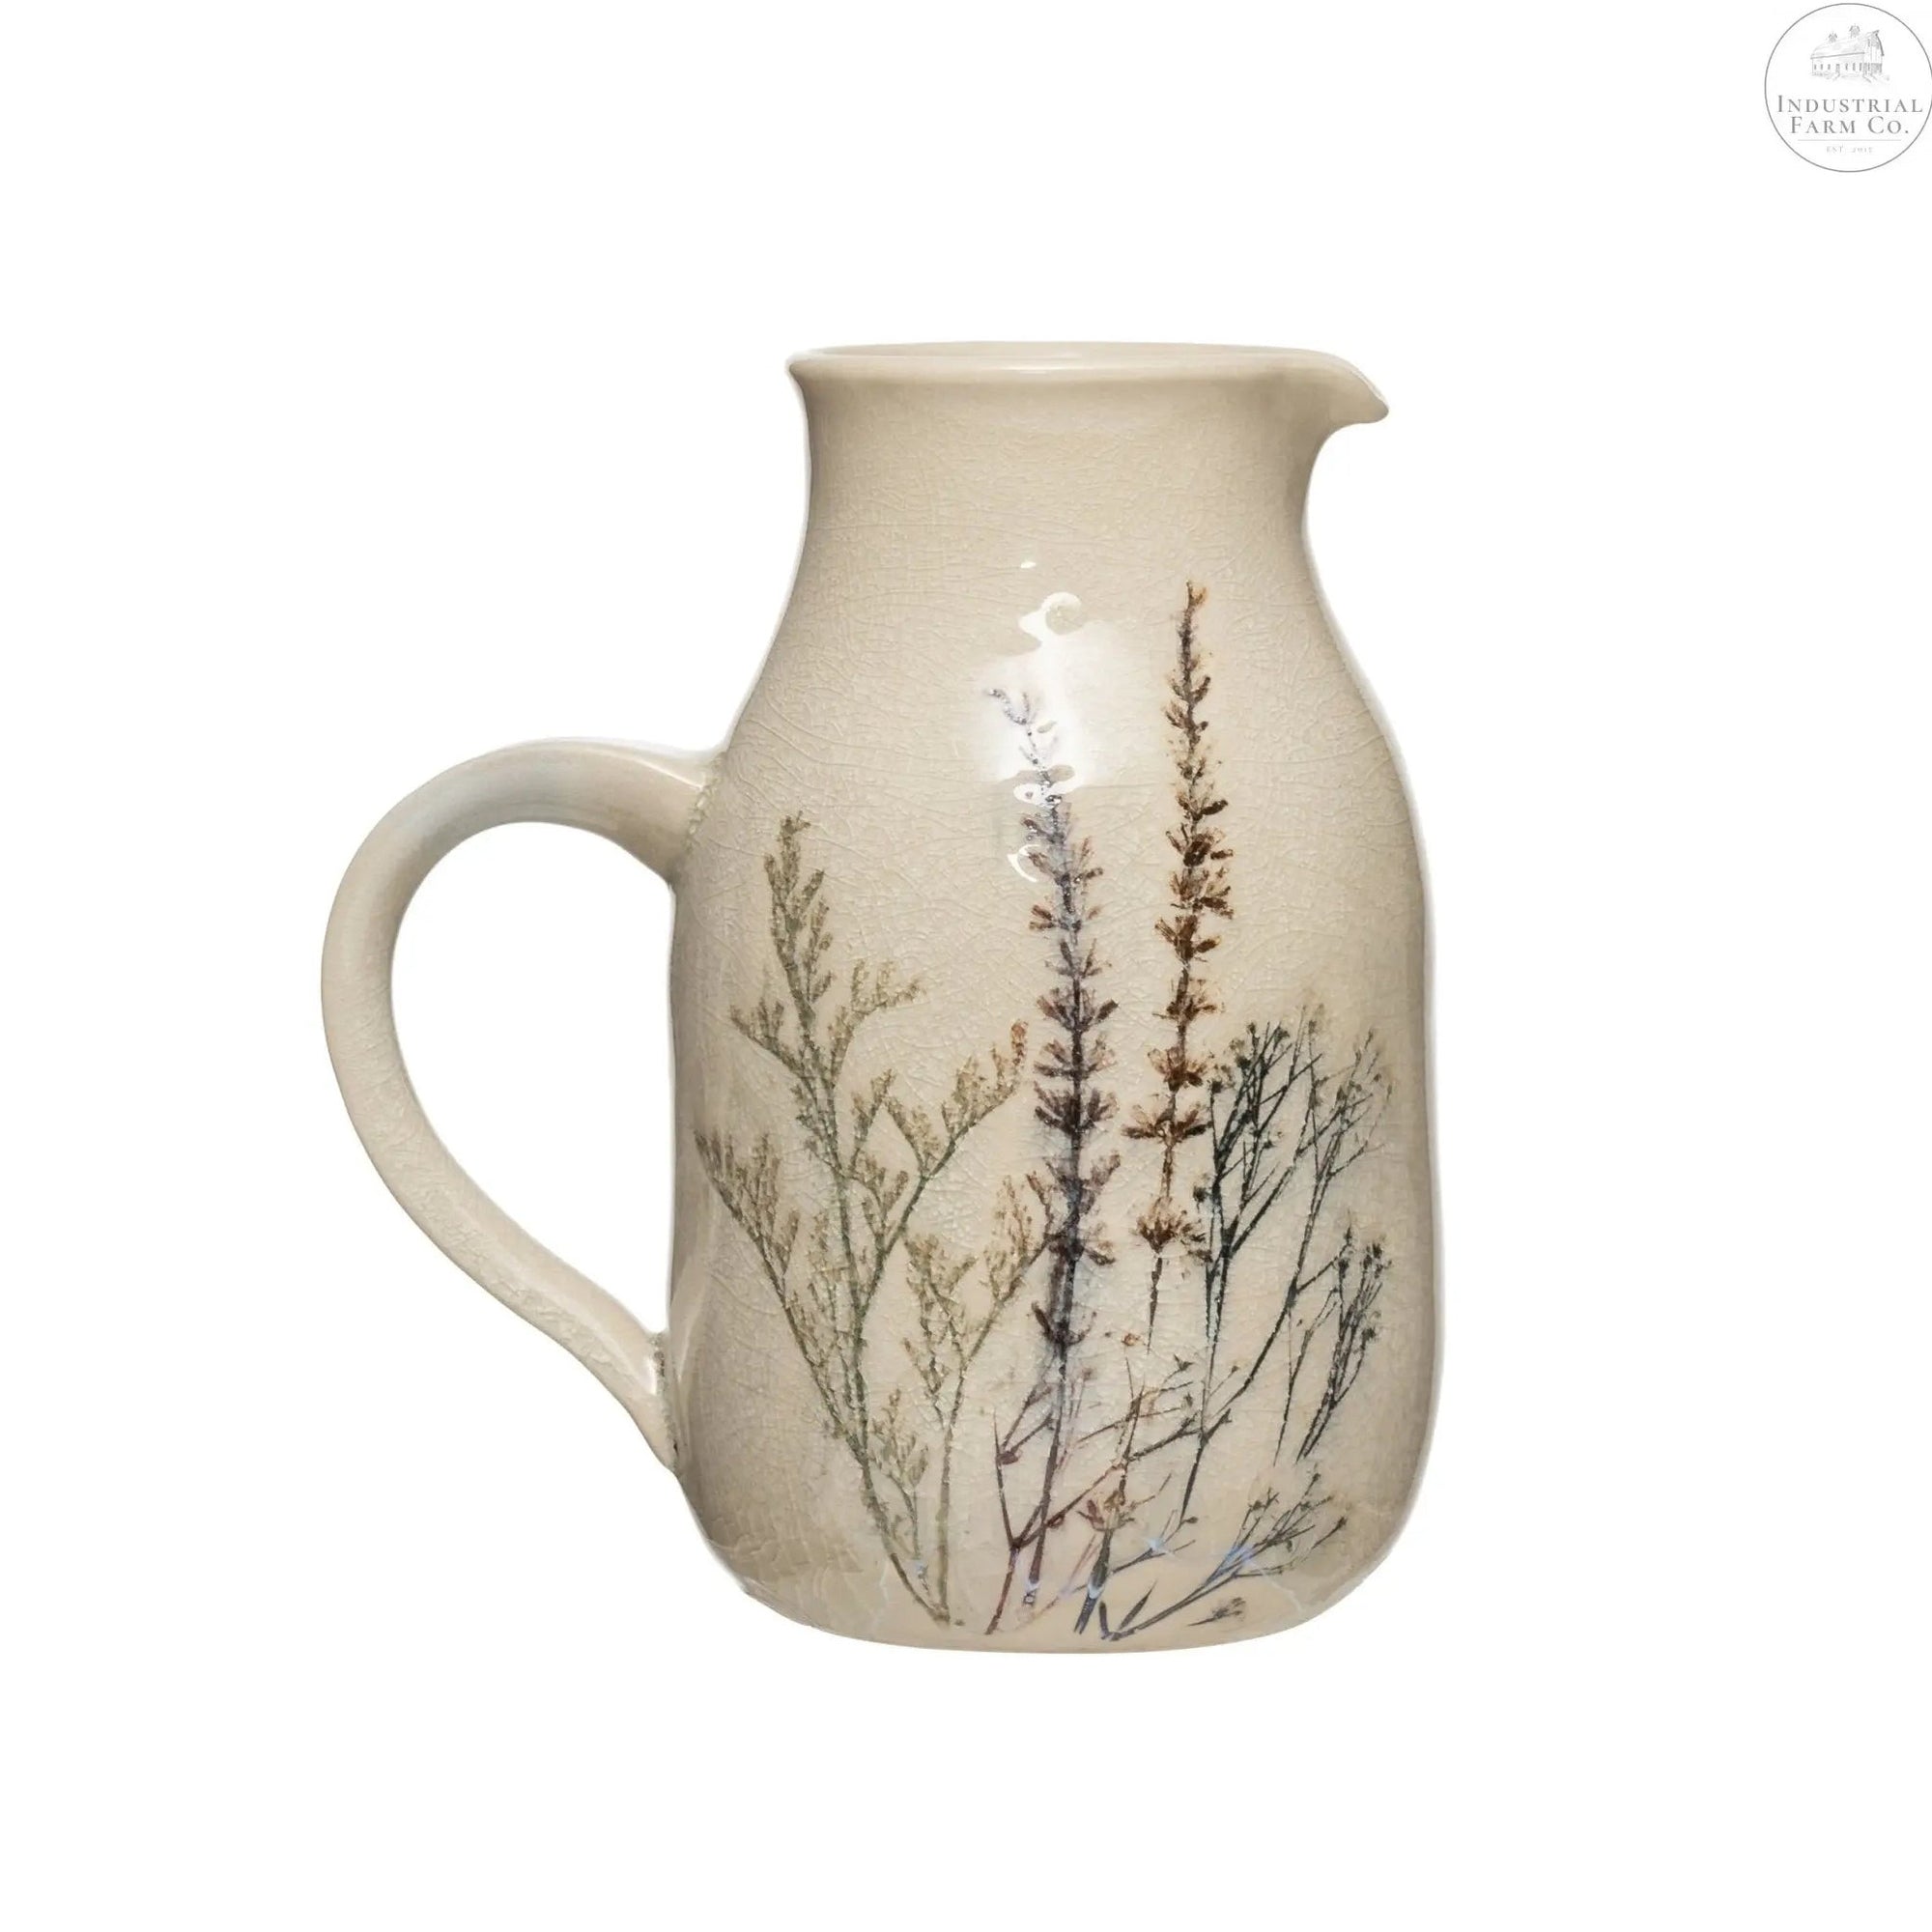 Floral Stoneware Debossed Pitcher Serving Pitchers & Carafes    | Industrial Farm Co